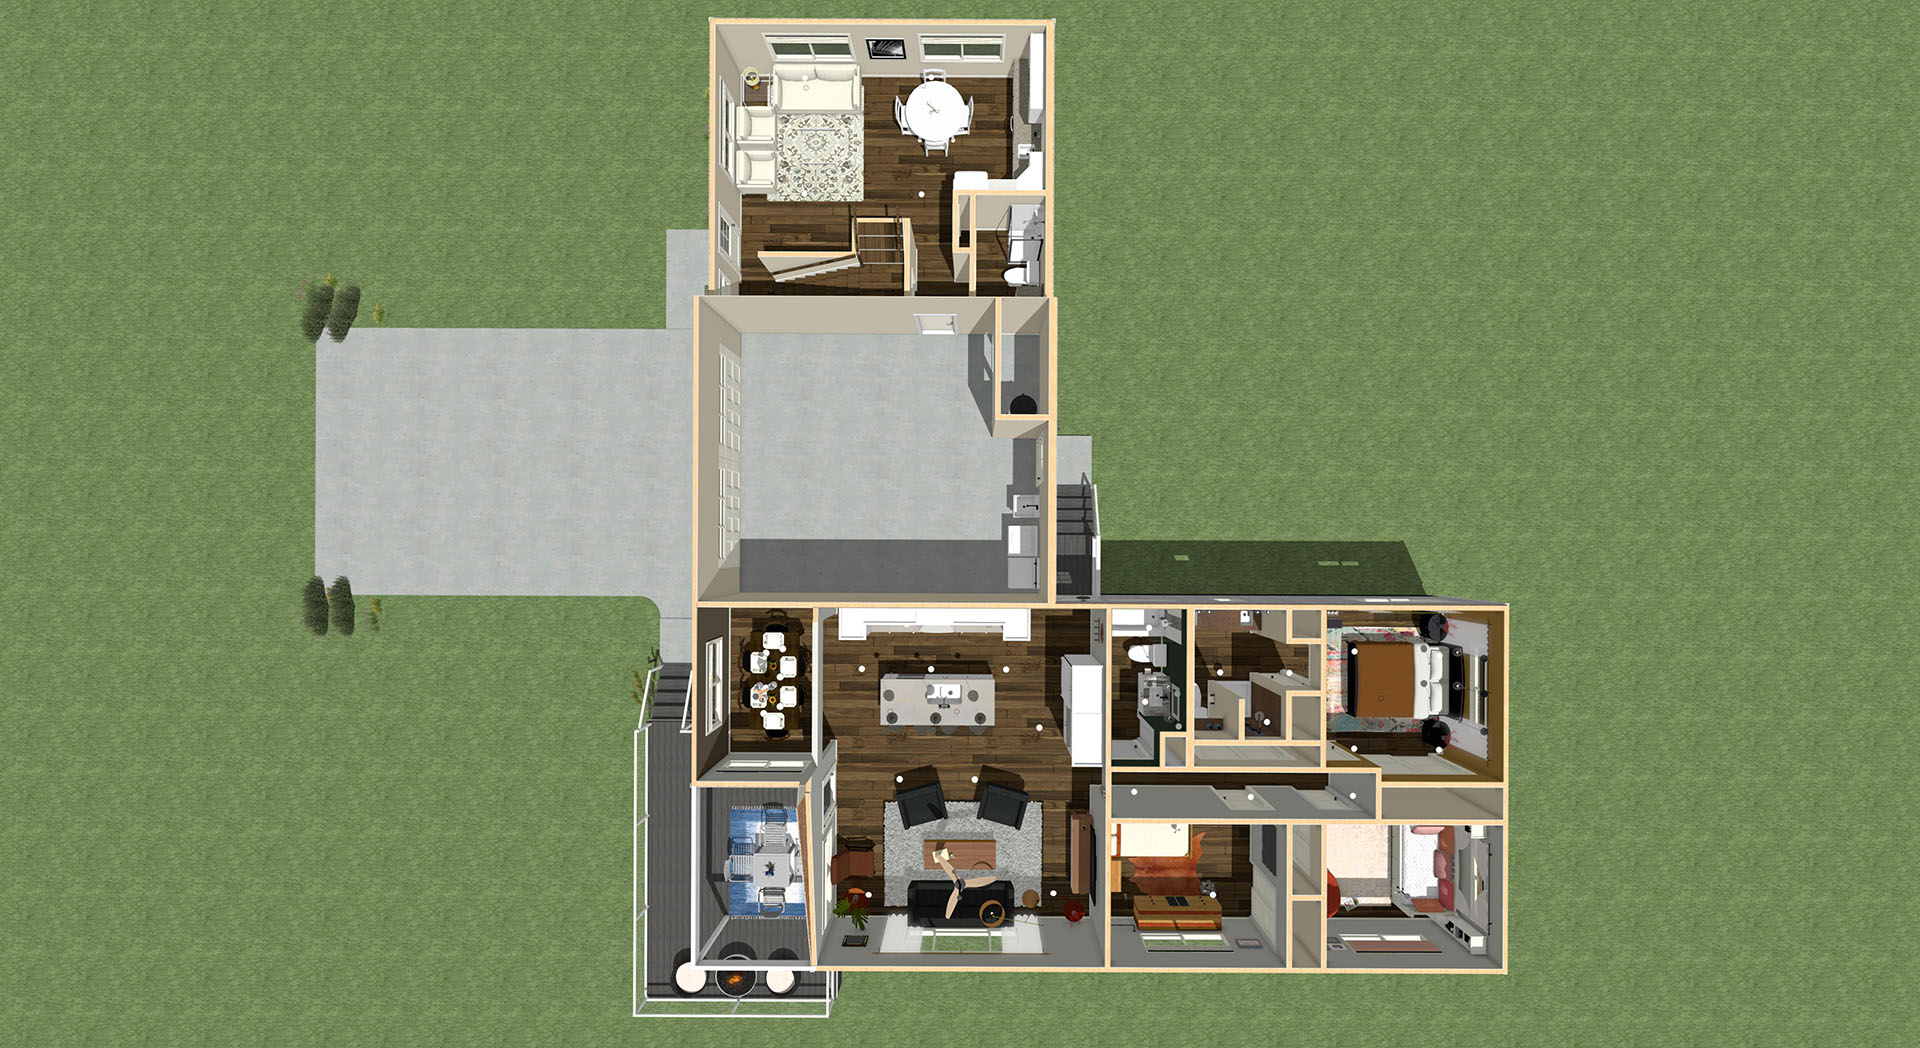 Pikake floor plan overview zoomed out